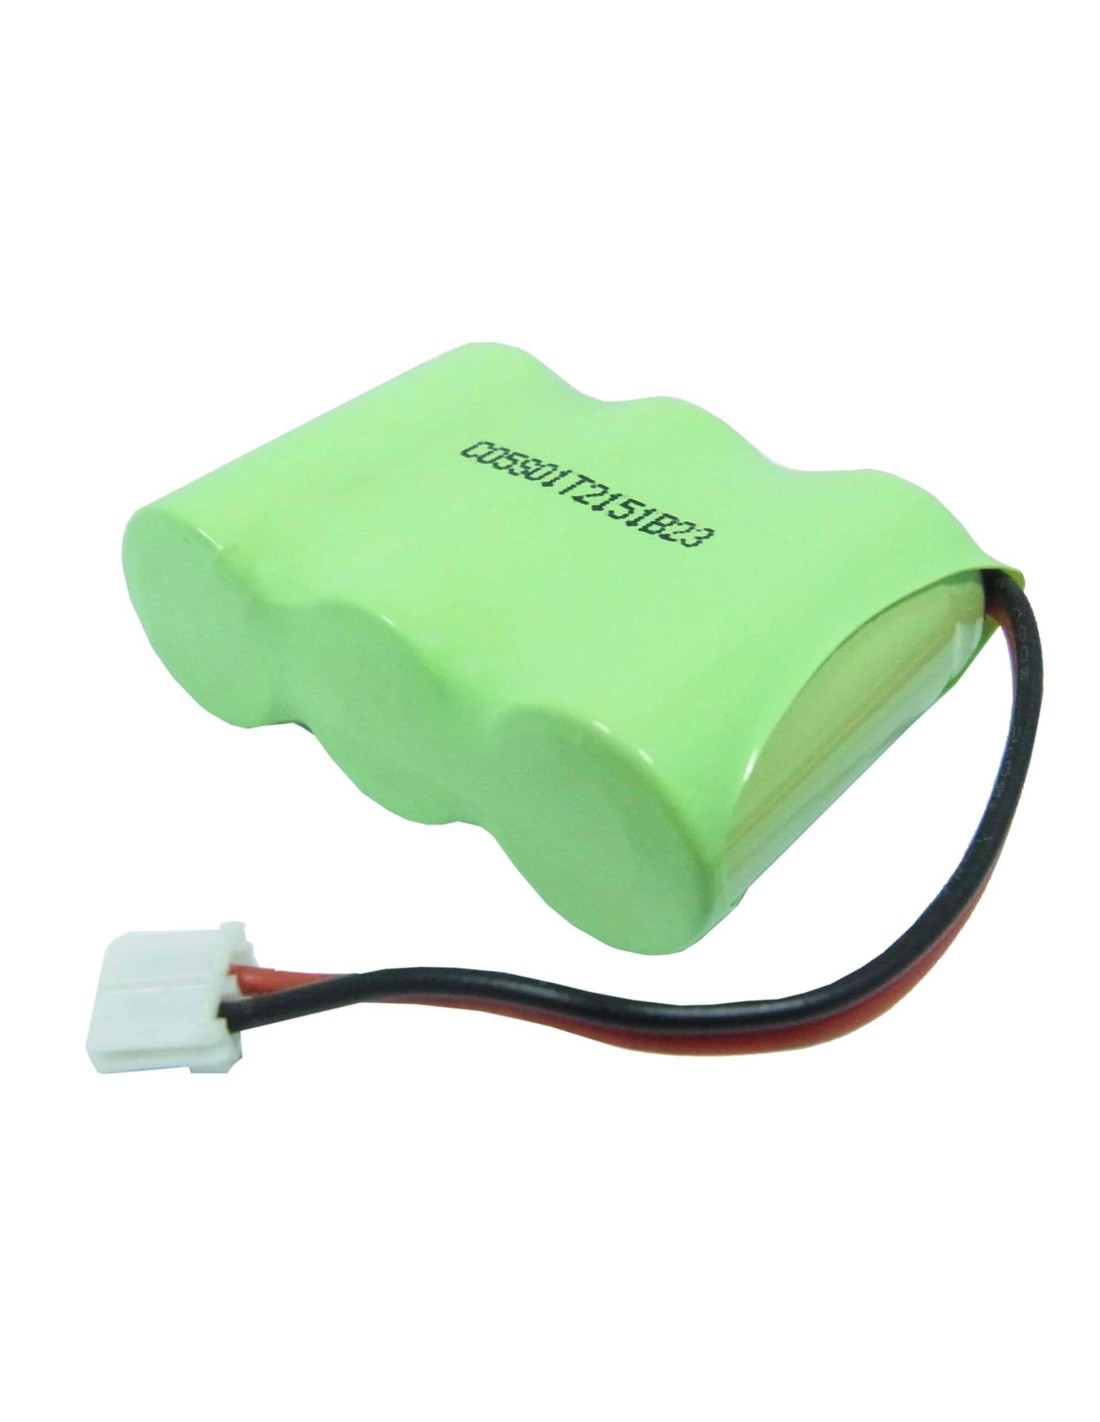 Battery for Philips, Cl8050, Cl-8050, Cl8100, Cl-8100, 3.6V, 600mAh - 2.16Wh